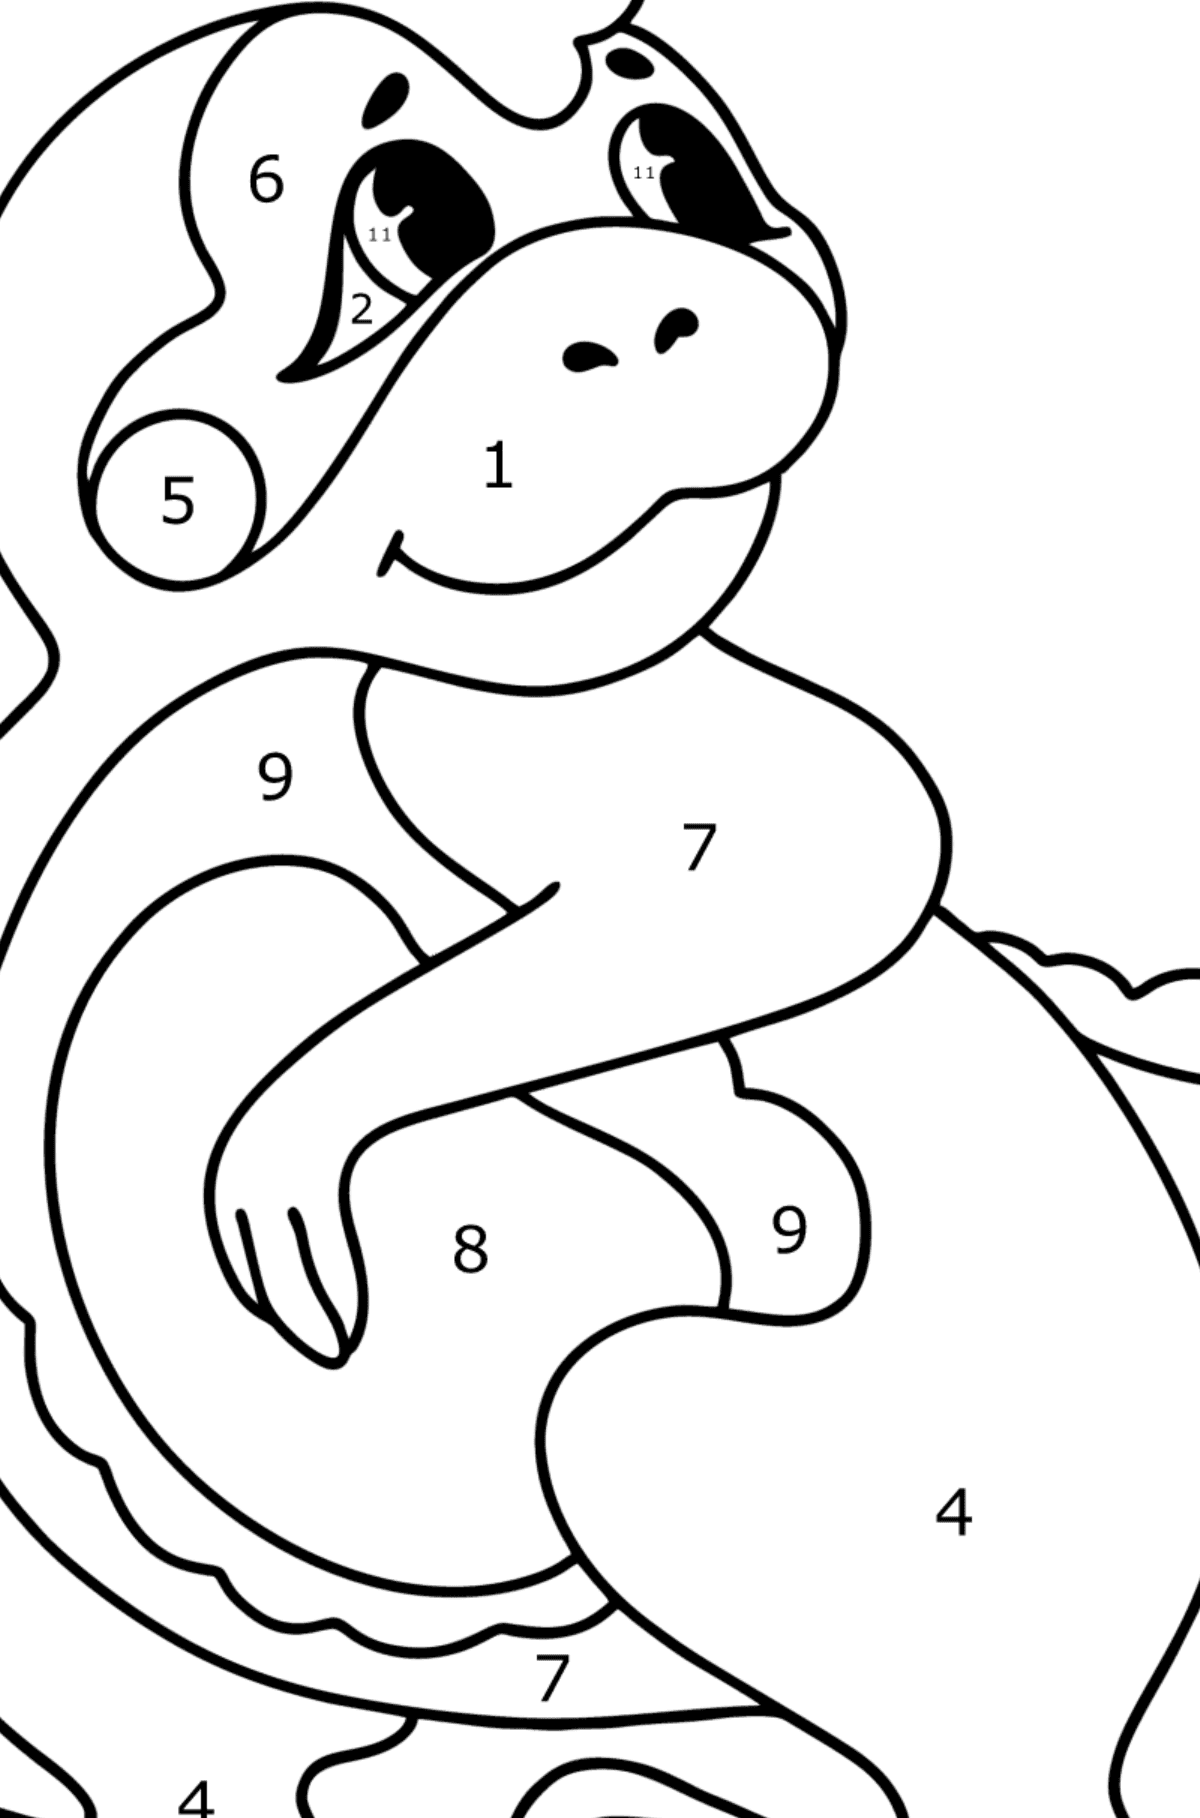 Baby dragon coloring page - Coloring by Numbers for Kids